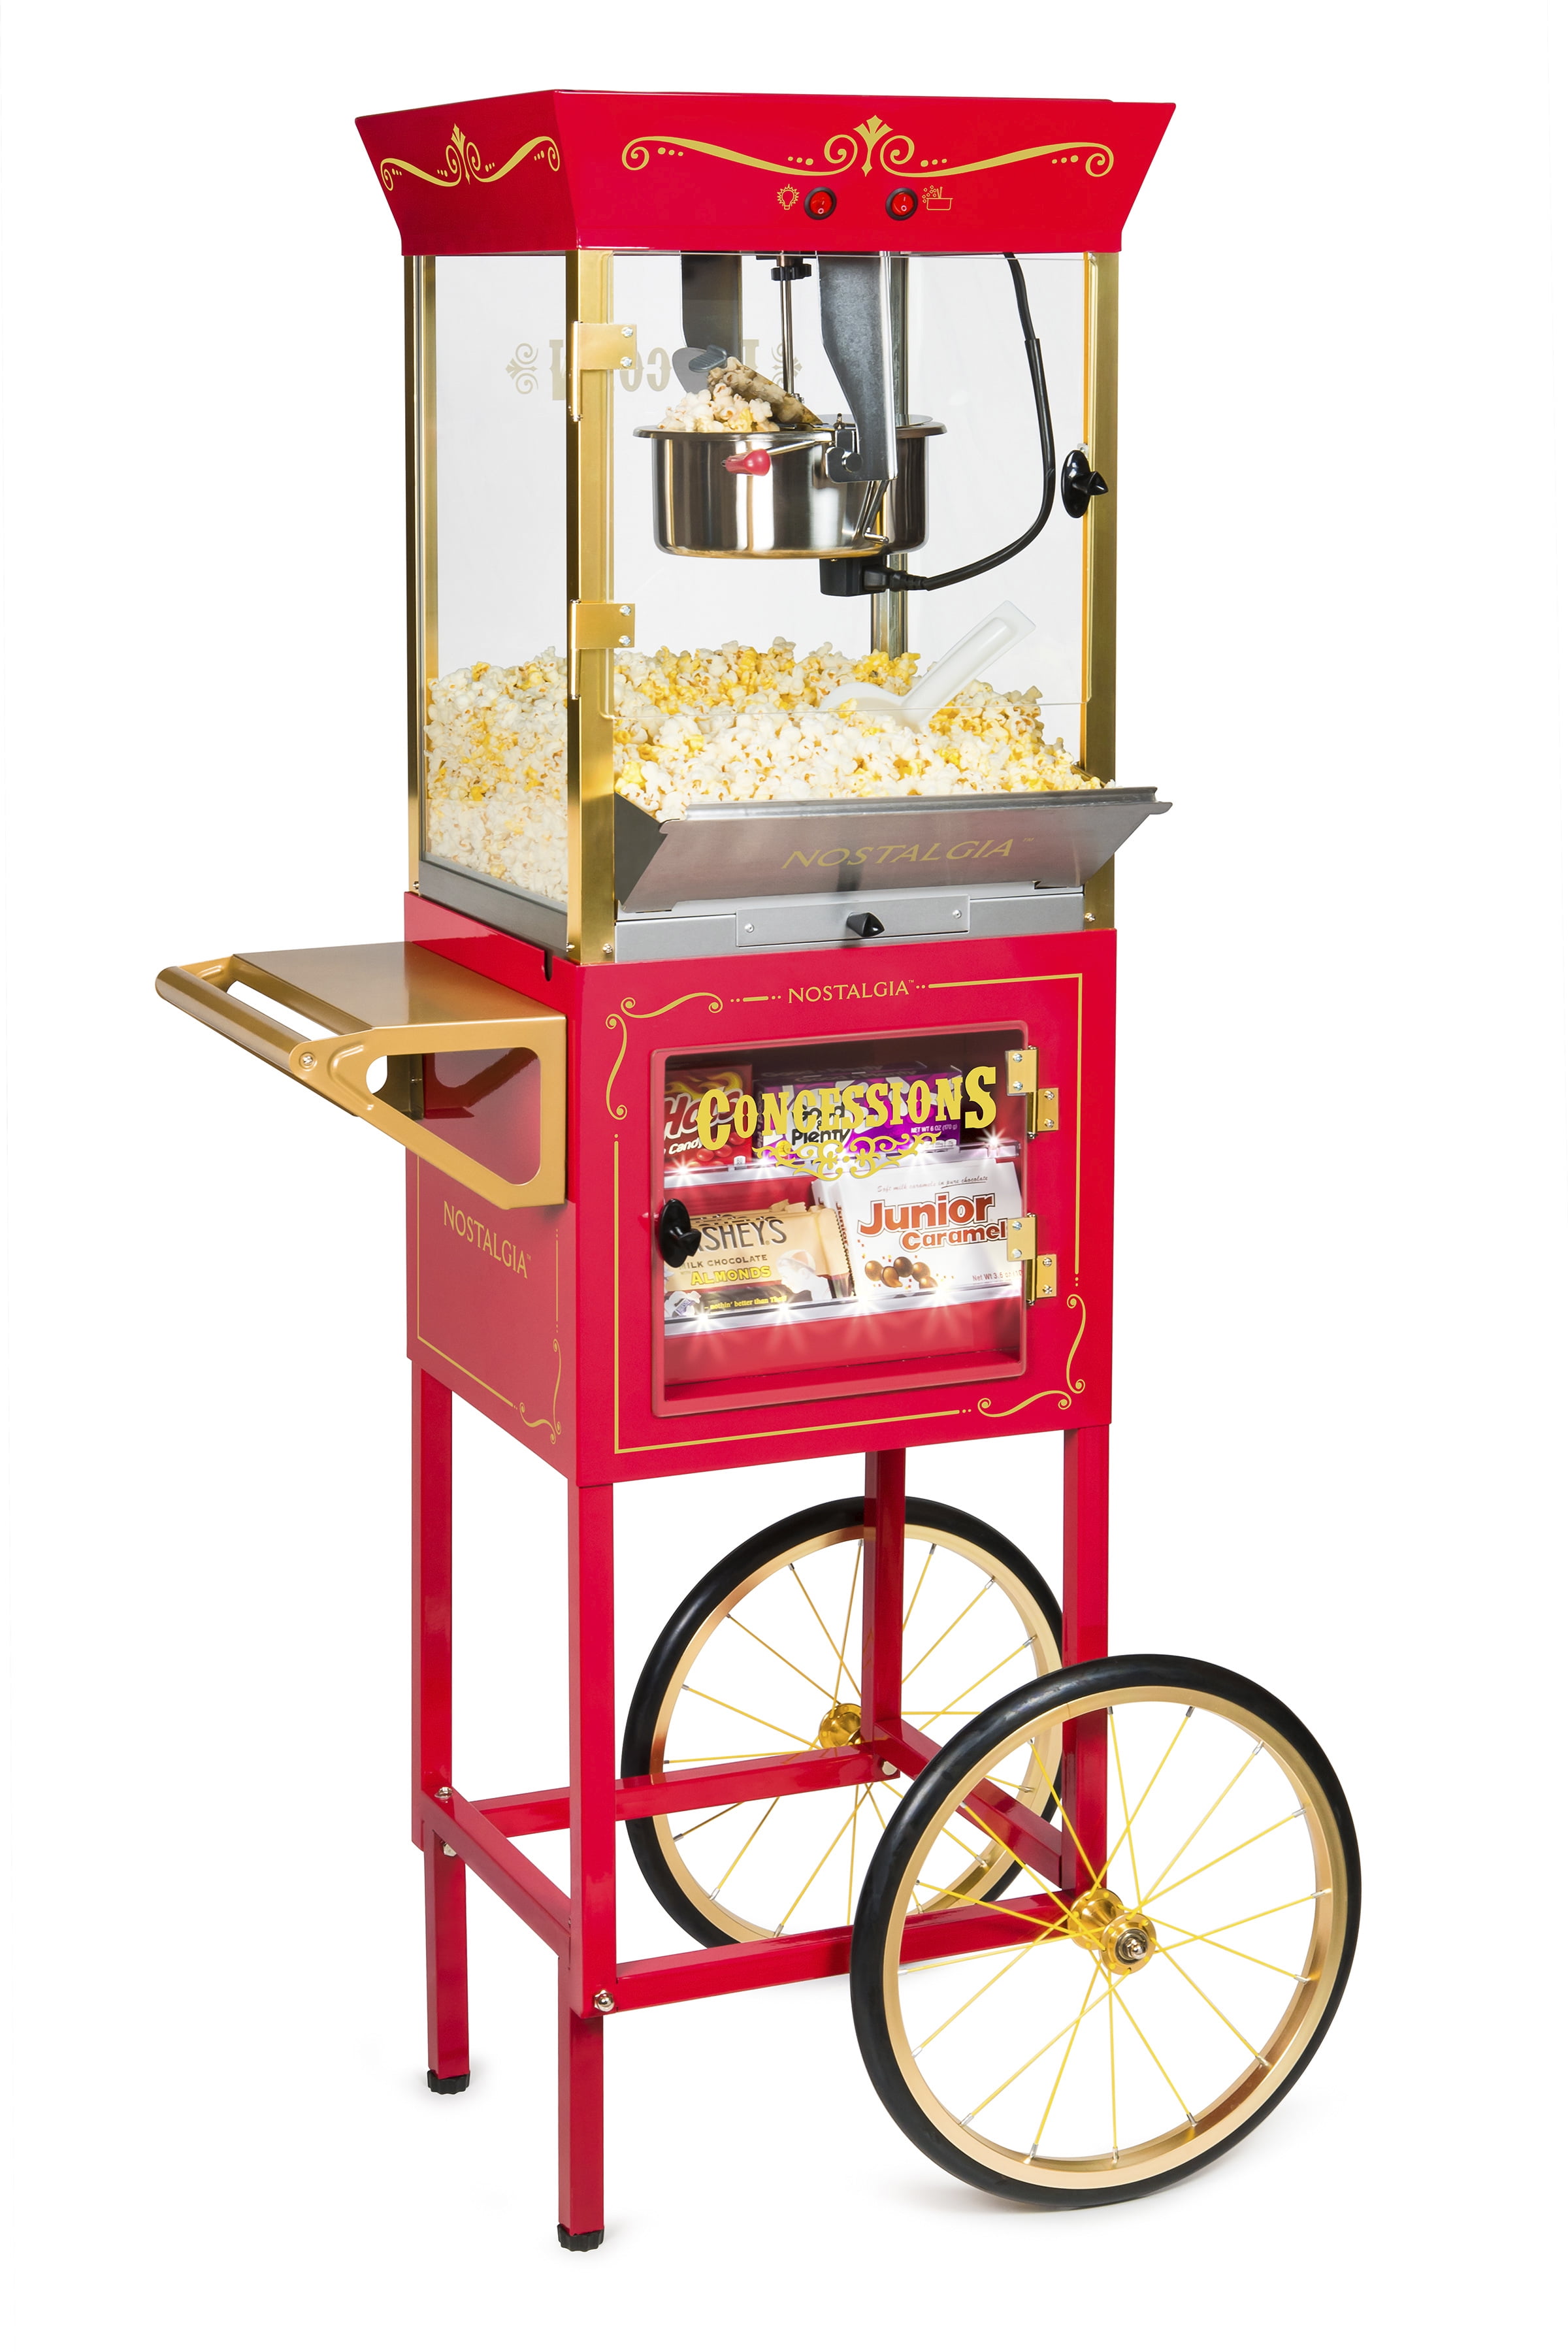 Best Home Popcorn Machines for Any Budget. - The Busy Budgeter